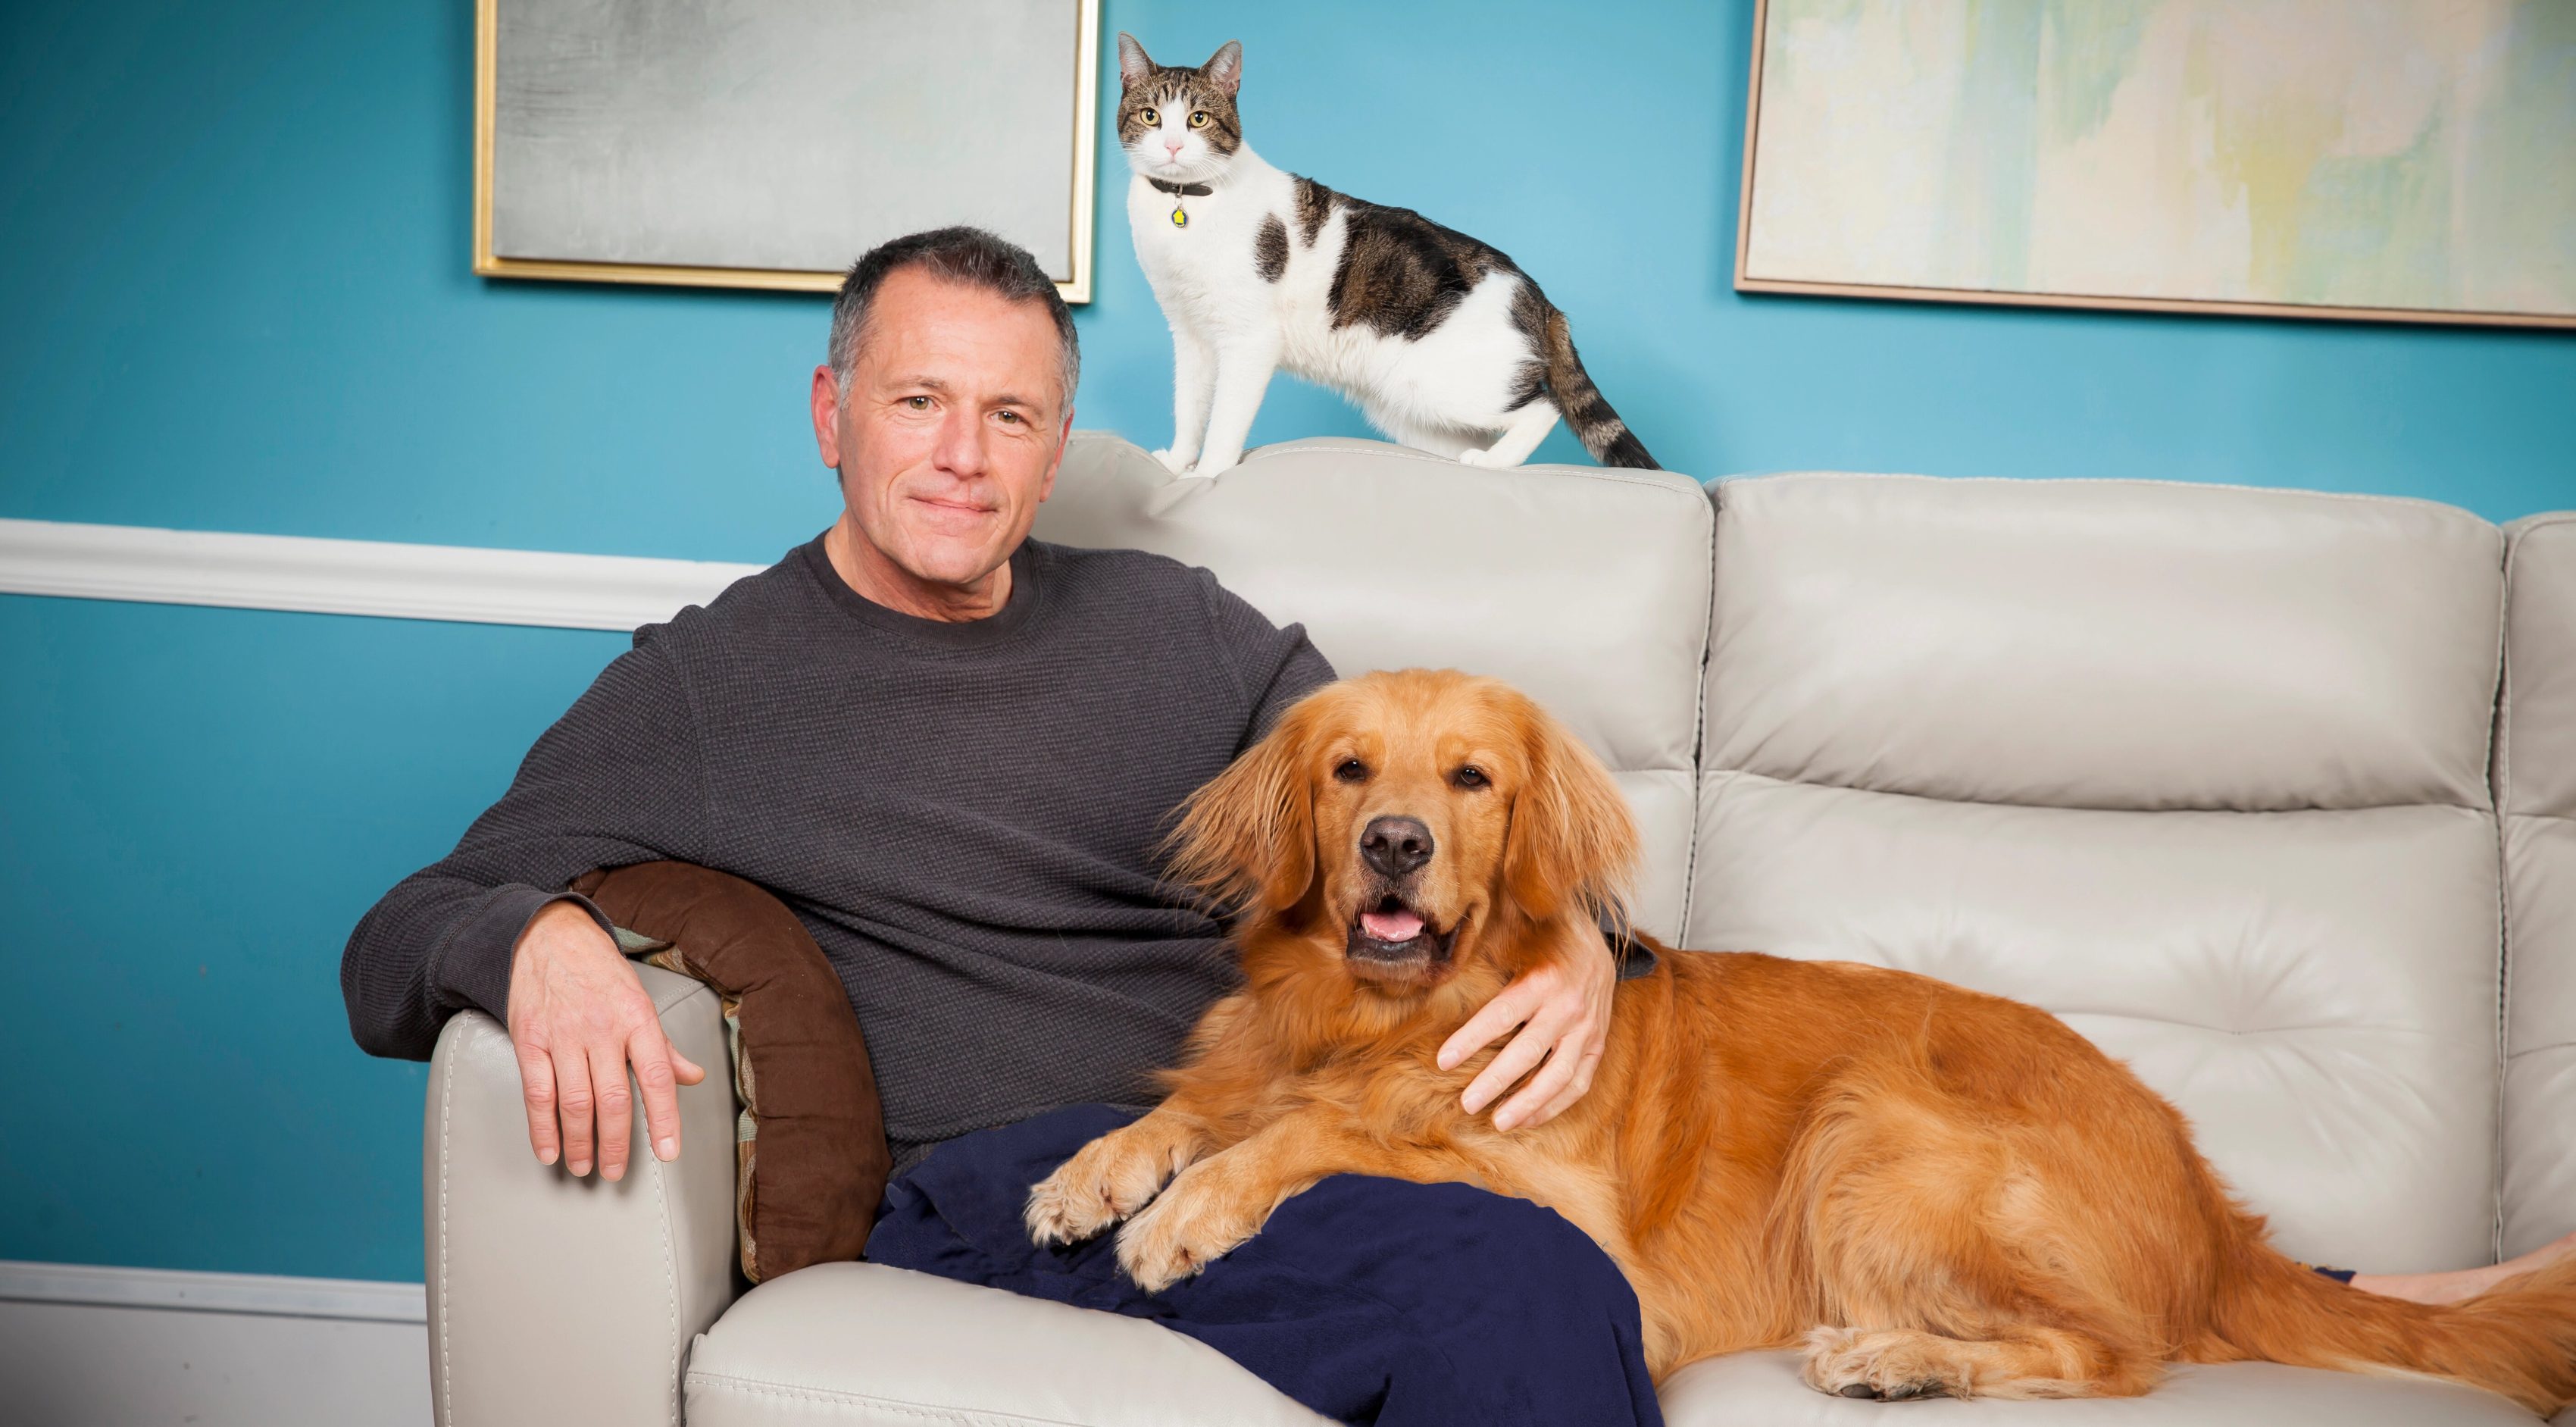 Male pet owner sitting on couch with his golden retriever and cat.